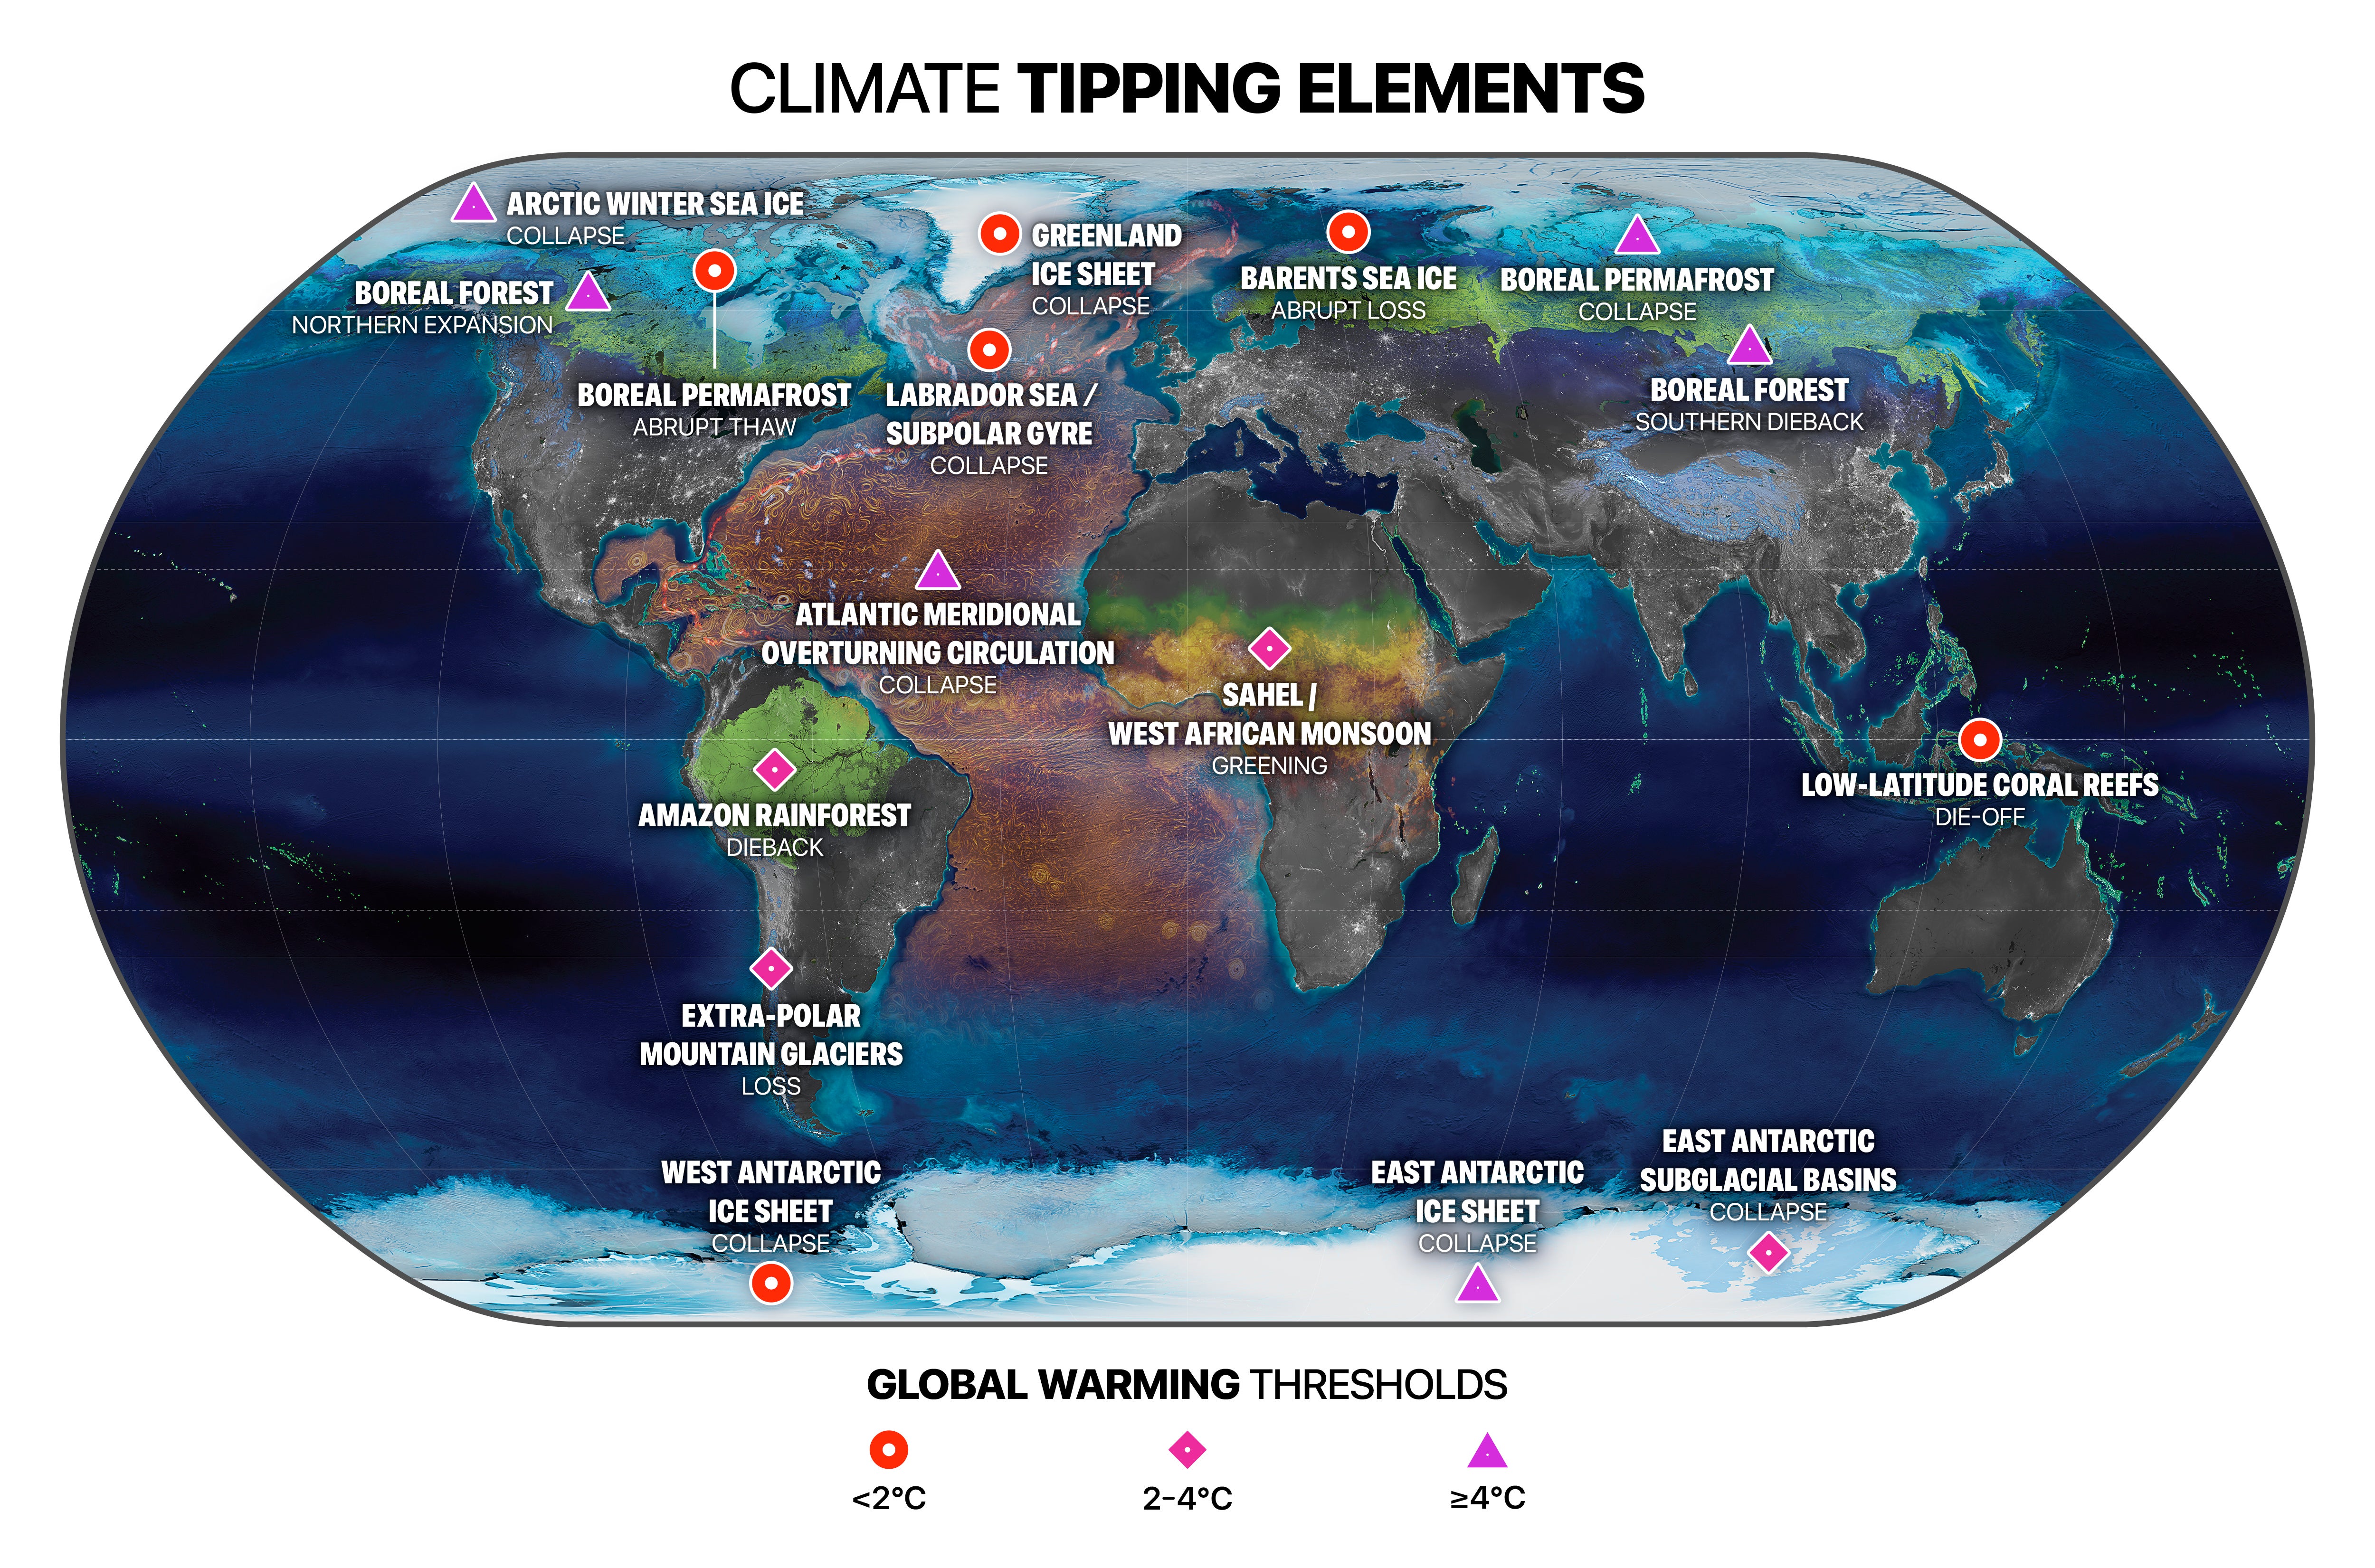 The location of different climate tipping points around the world.  (Image: DESIGNED BY GLOBAIA FOR THE EARTH COMMISSION, PIK, SRC AND EXETER UNIVERSITY)